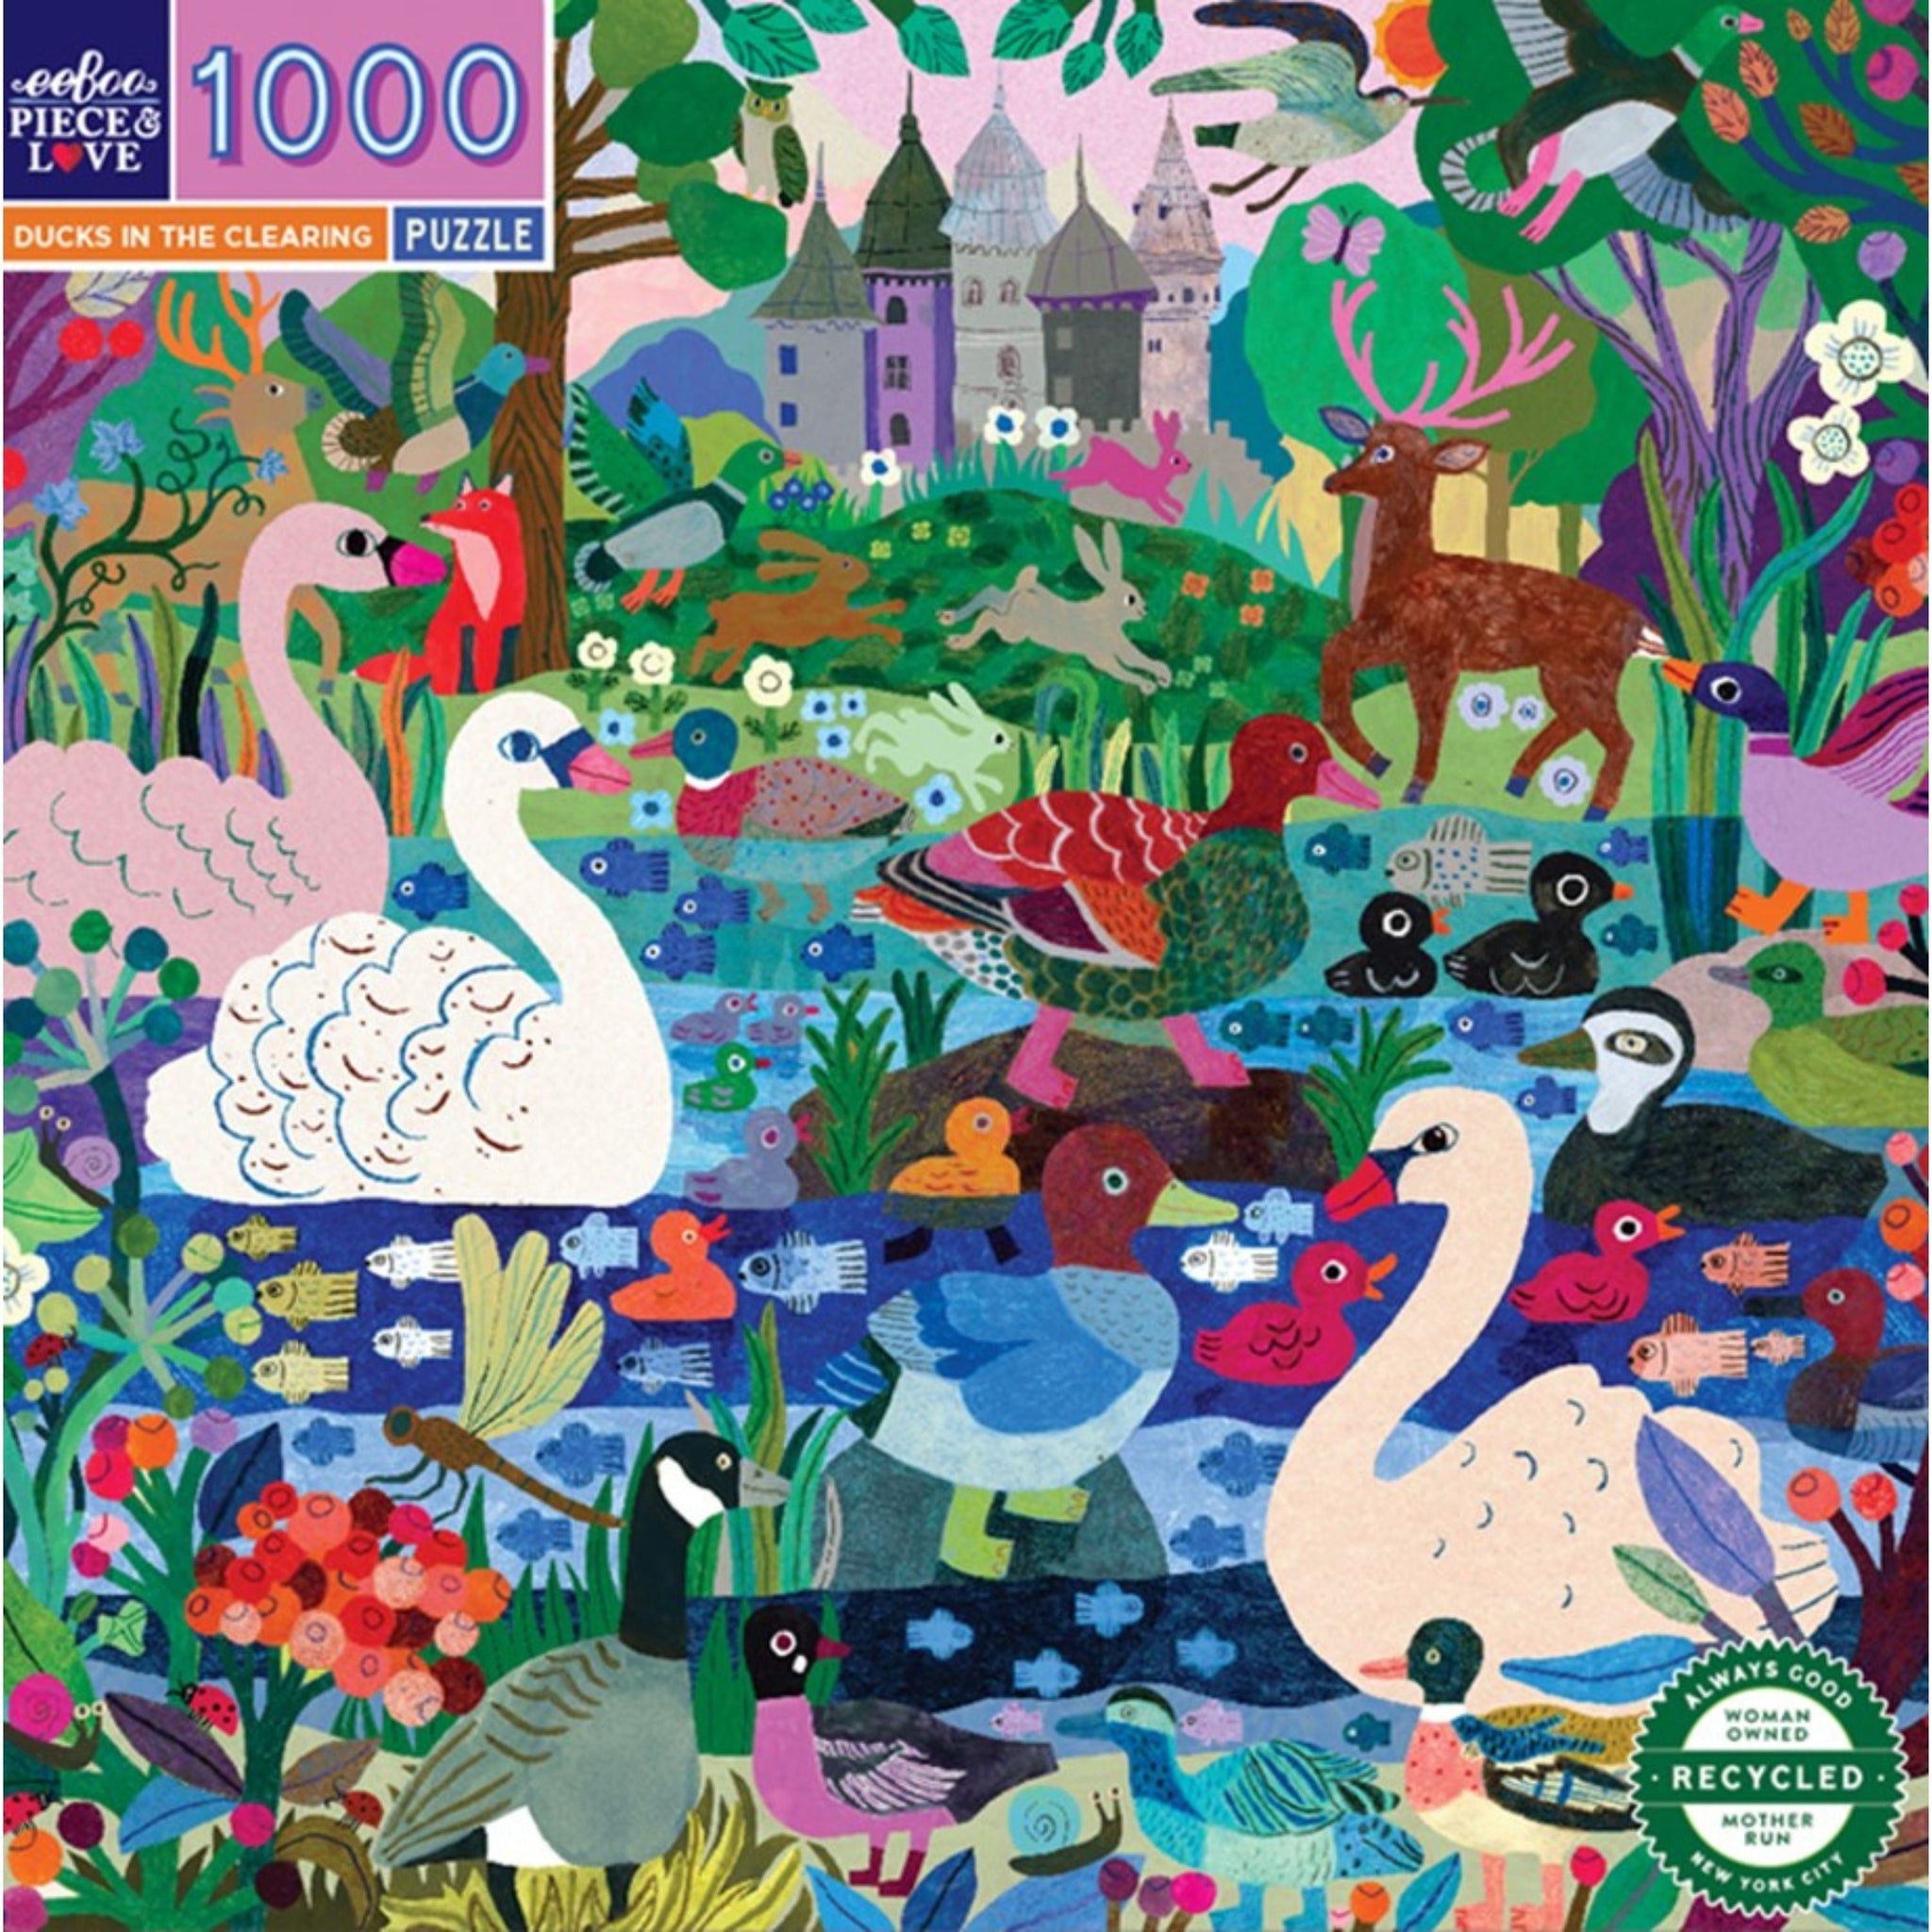 eeBoo 1000pc Puzzle Ducks in the Clearing Sq